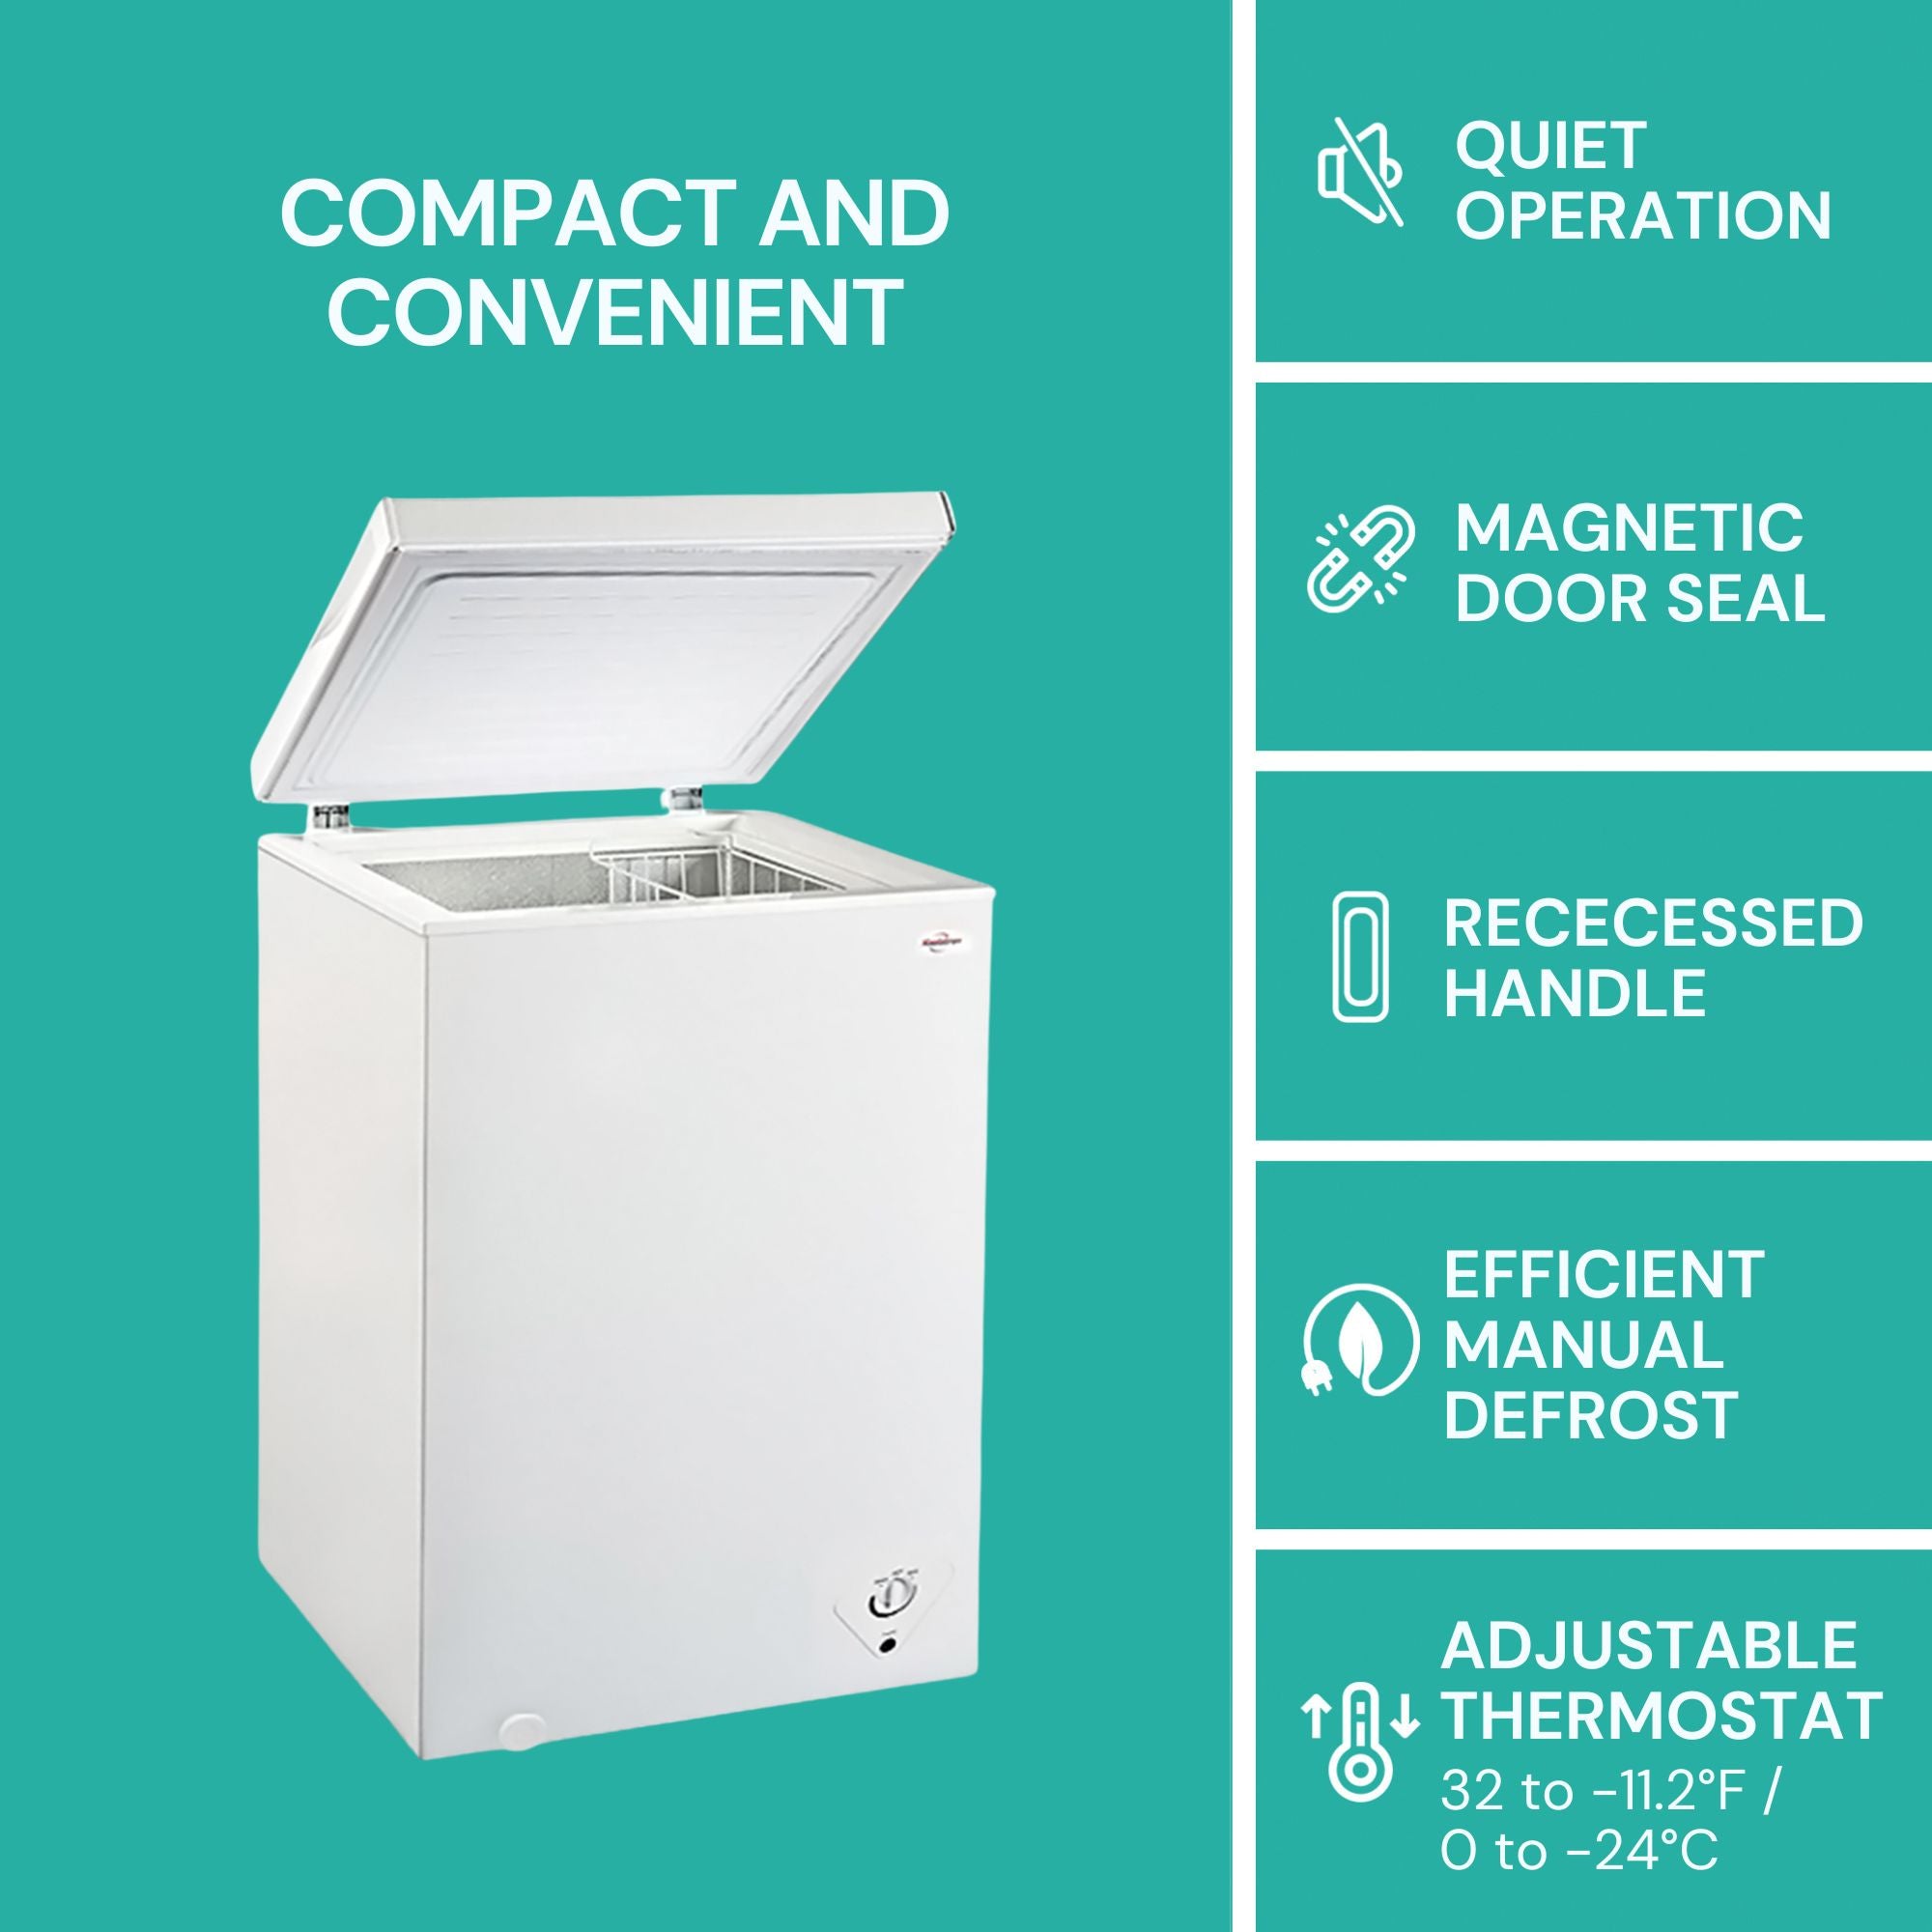 Koolatron white chest freezer, open, on an aqua background with text above reading, "Compact and convenient." Icons and text to the right describe features: Quiet operation; magnetic door seal; recessed handle; efficient manual defrost; adjustable thermostat 32 to -11.2°F/0 to -24°C